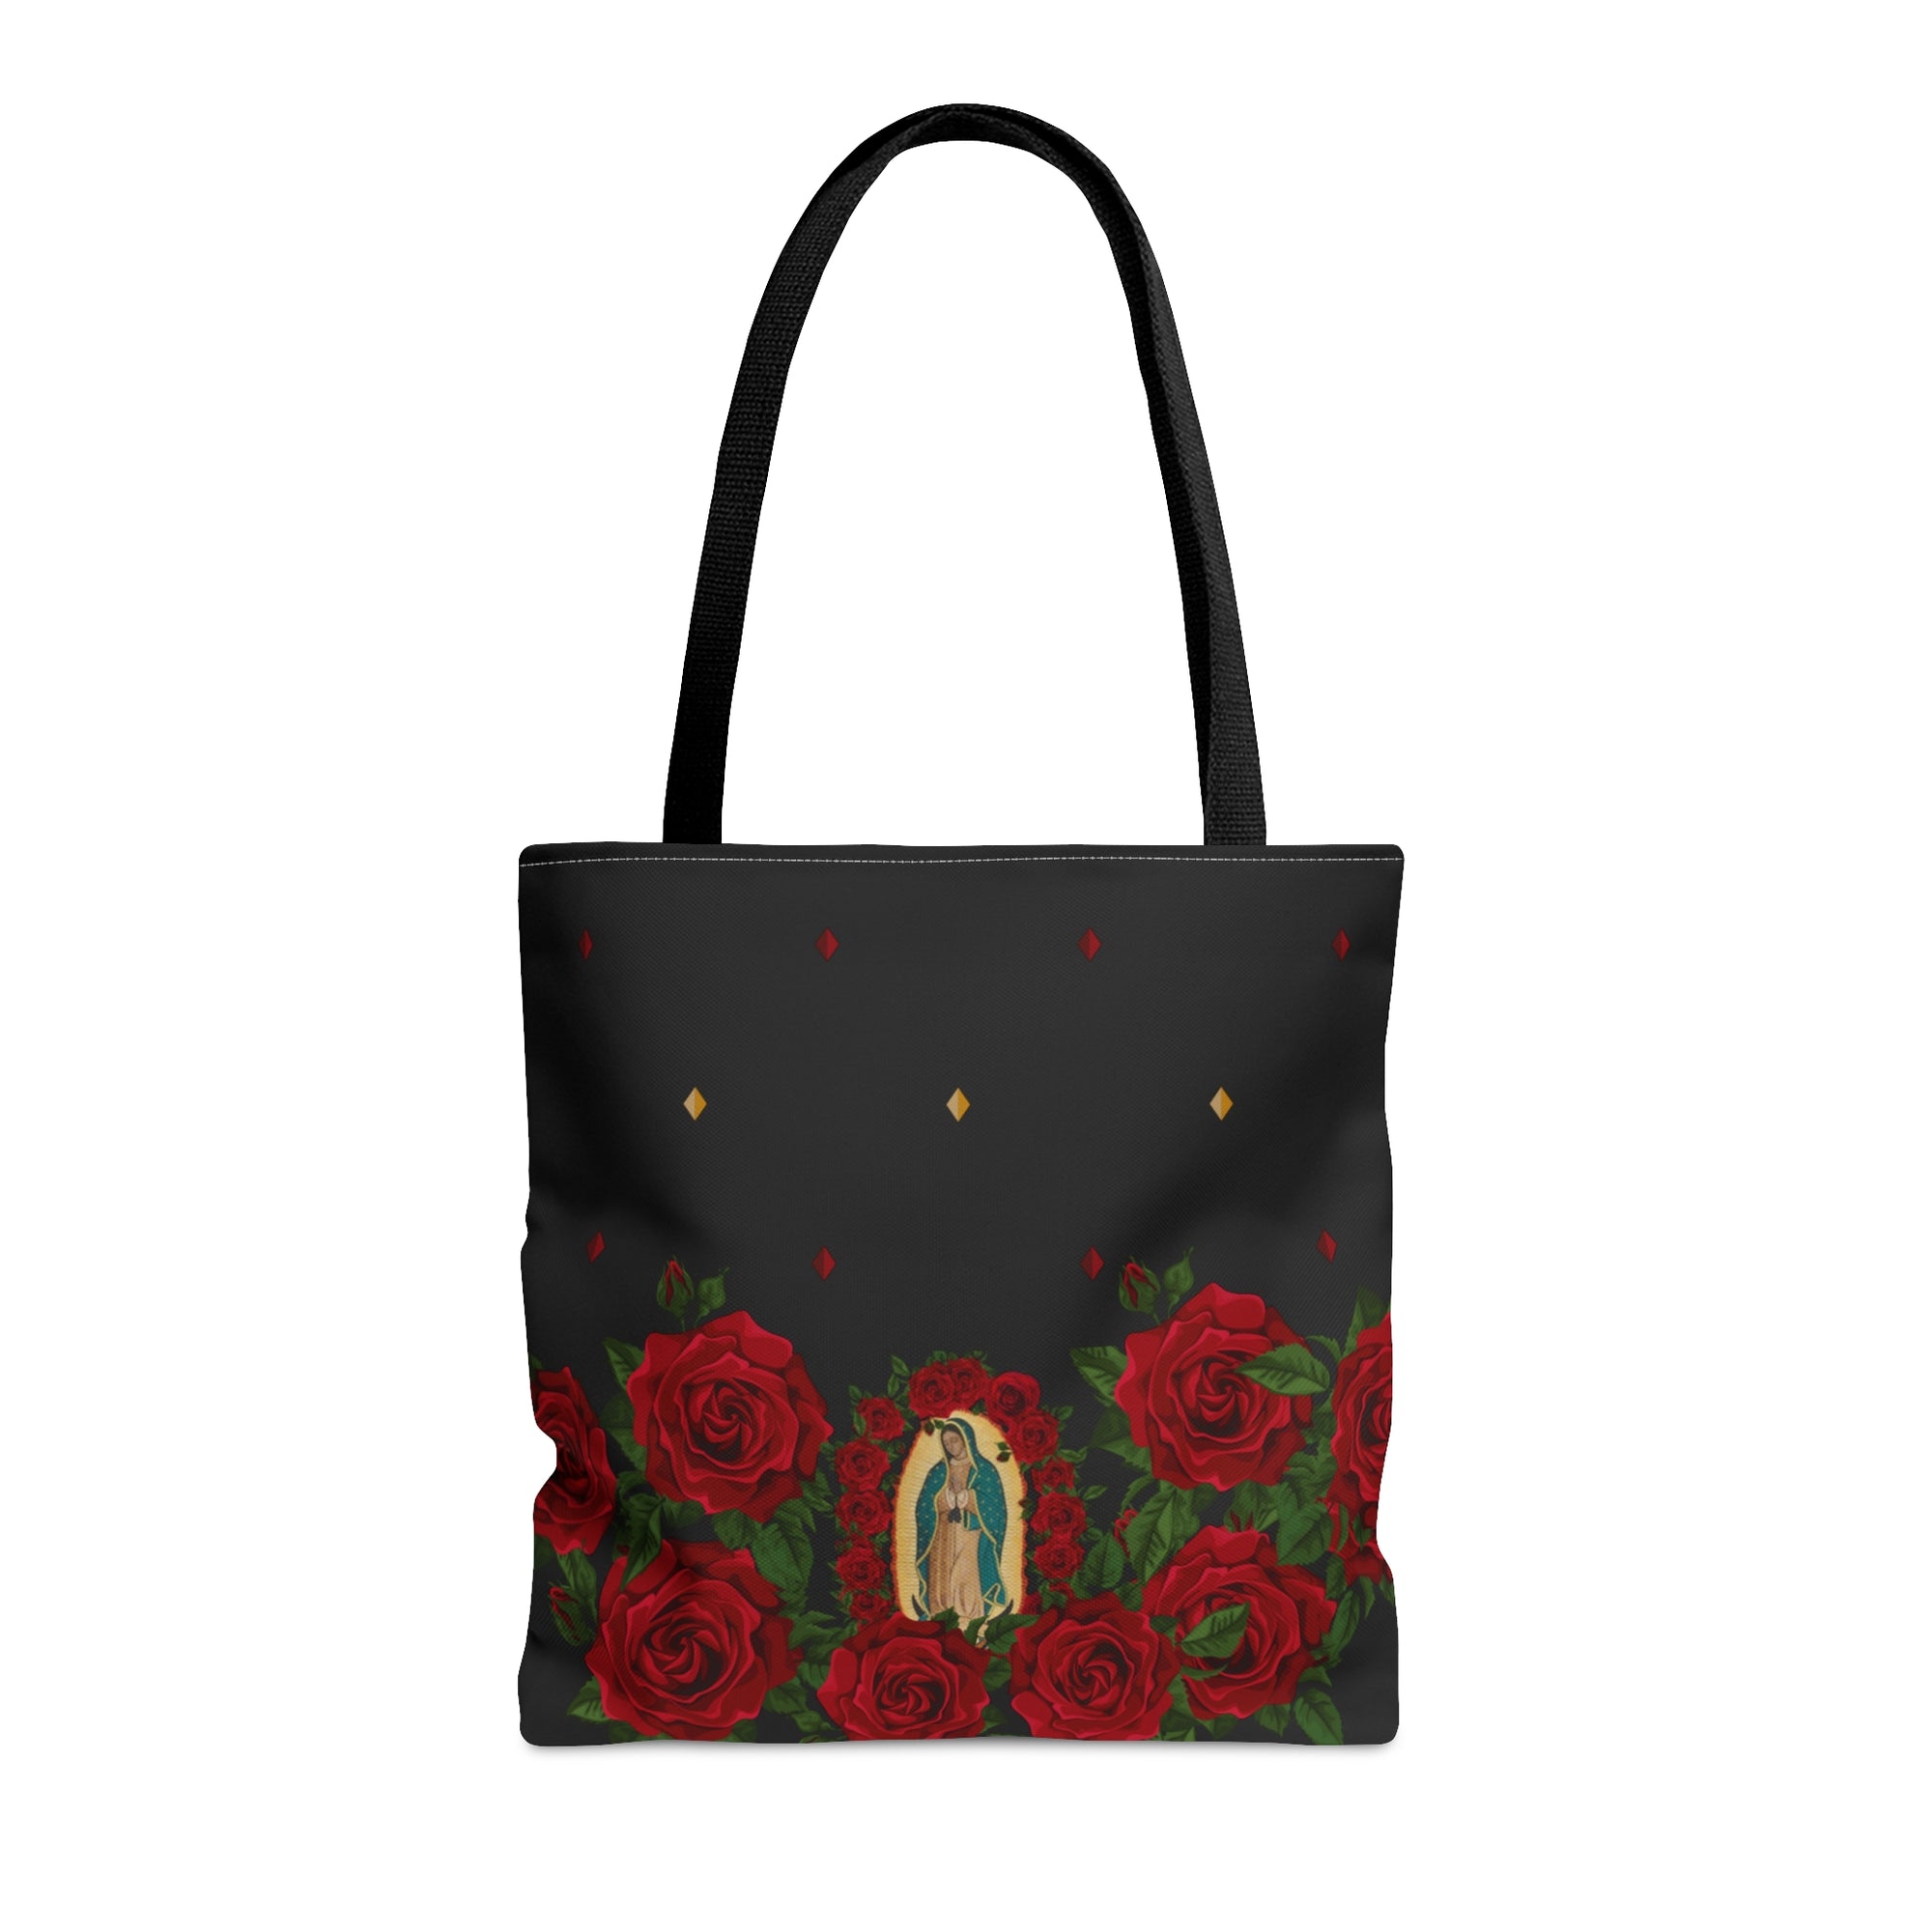 Our Lady of Guadalupe 16"x16" Tote Bag